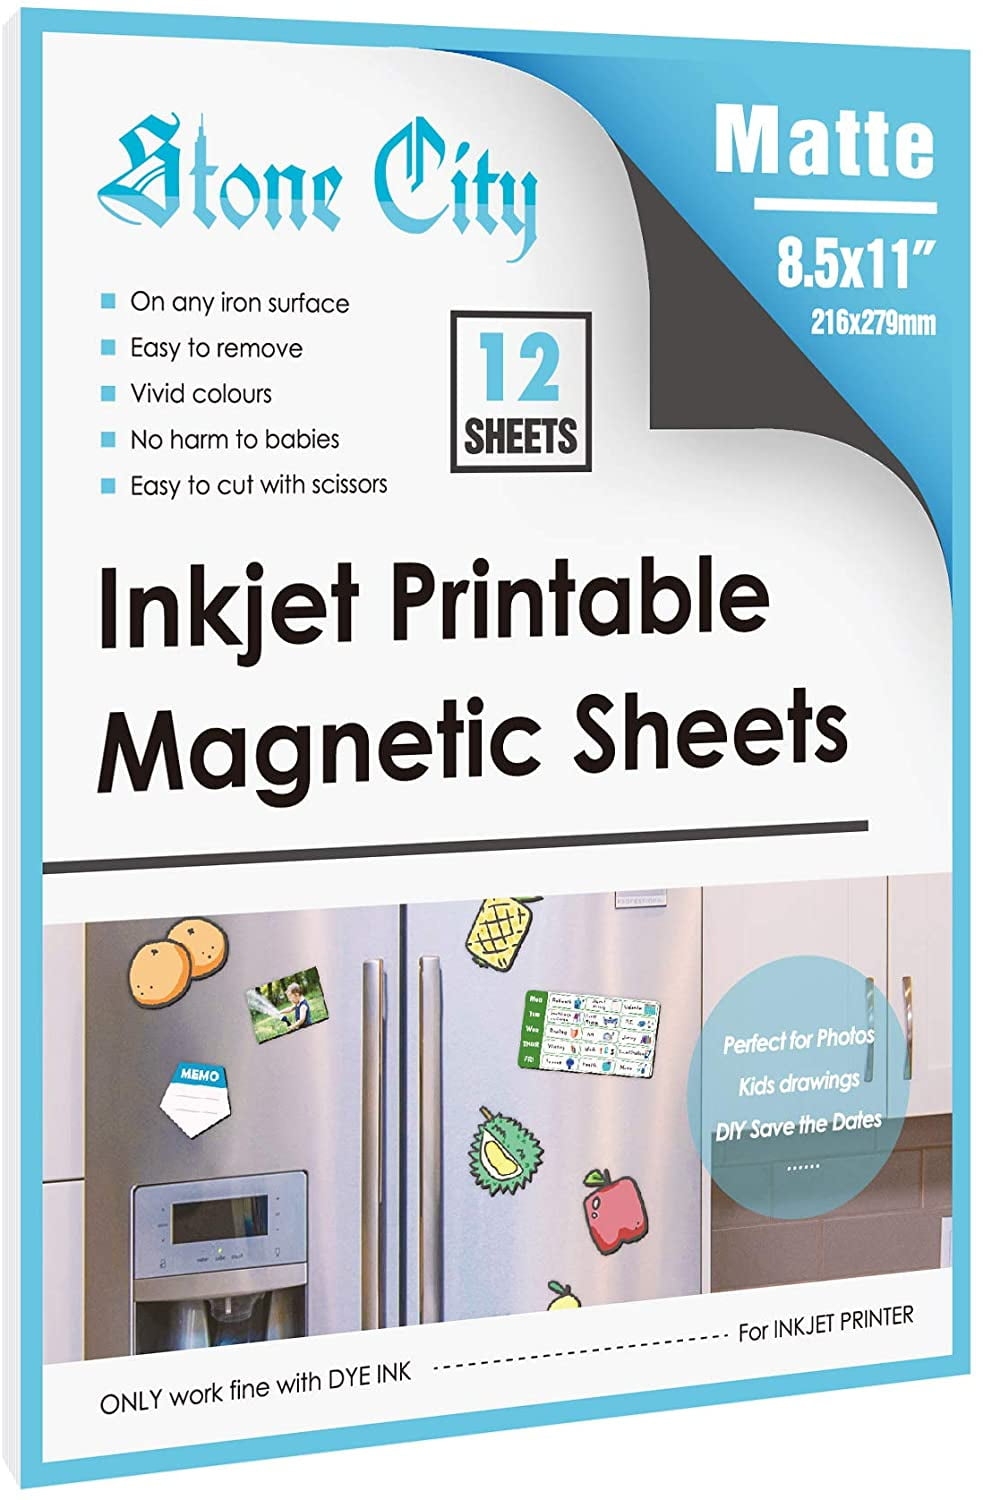 12 Printable Magnetic Sheets Magnet Photo Paper 8 5x 11 Matte For Inkjet Laser Printers 12 Mil Cutable For DIY Signs Photos Crafts Walmart